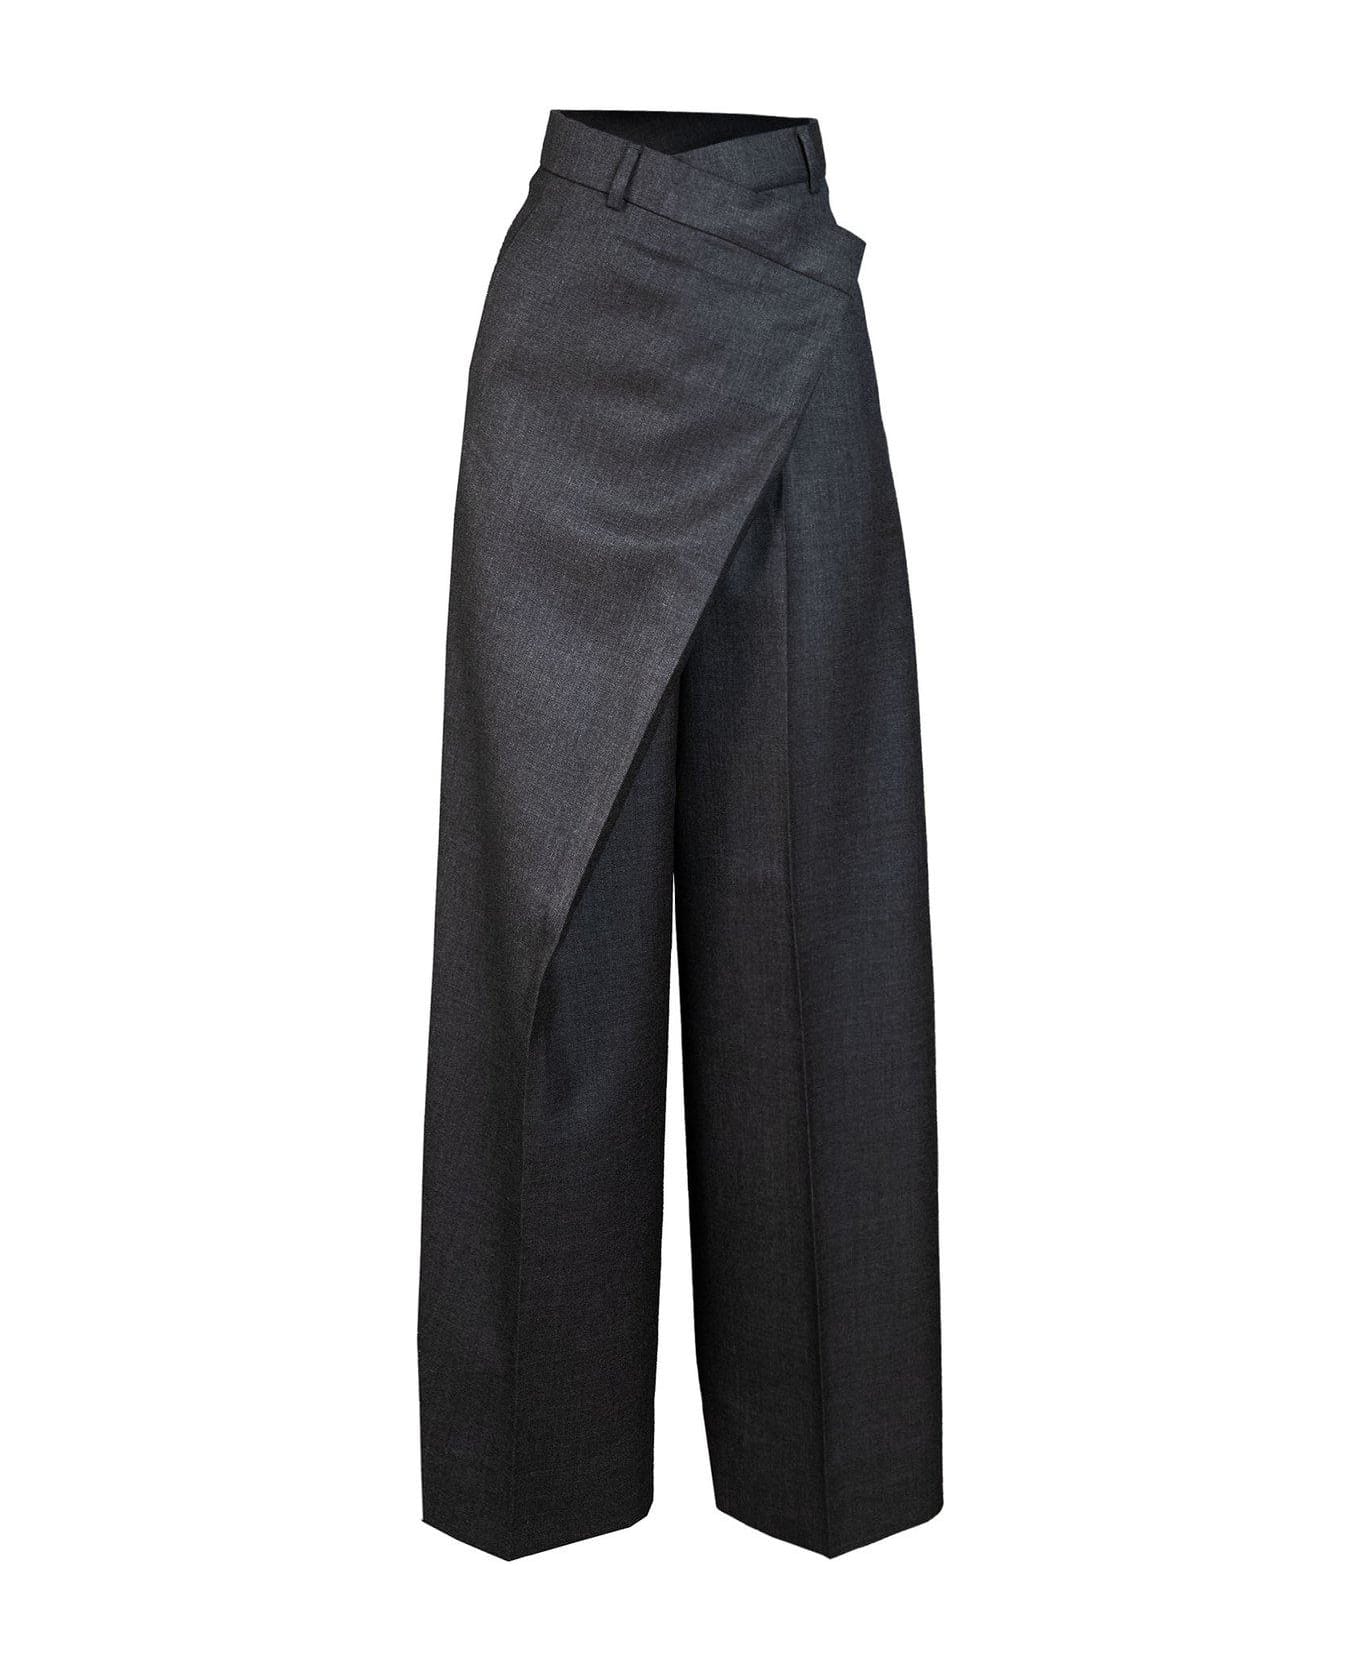 Acne Studios Tailored Wrap Trousers - GREY